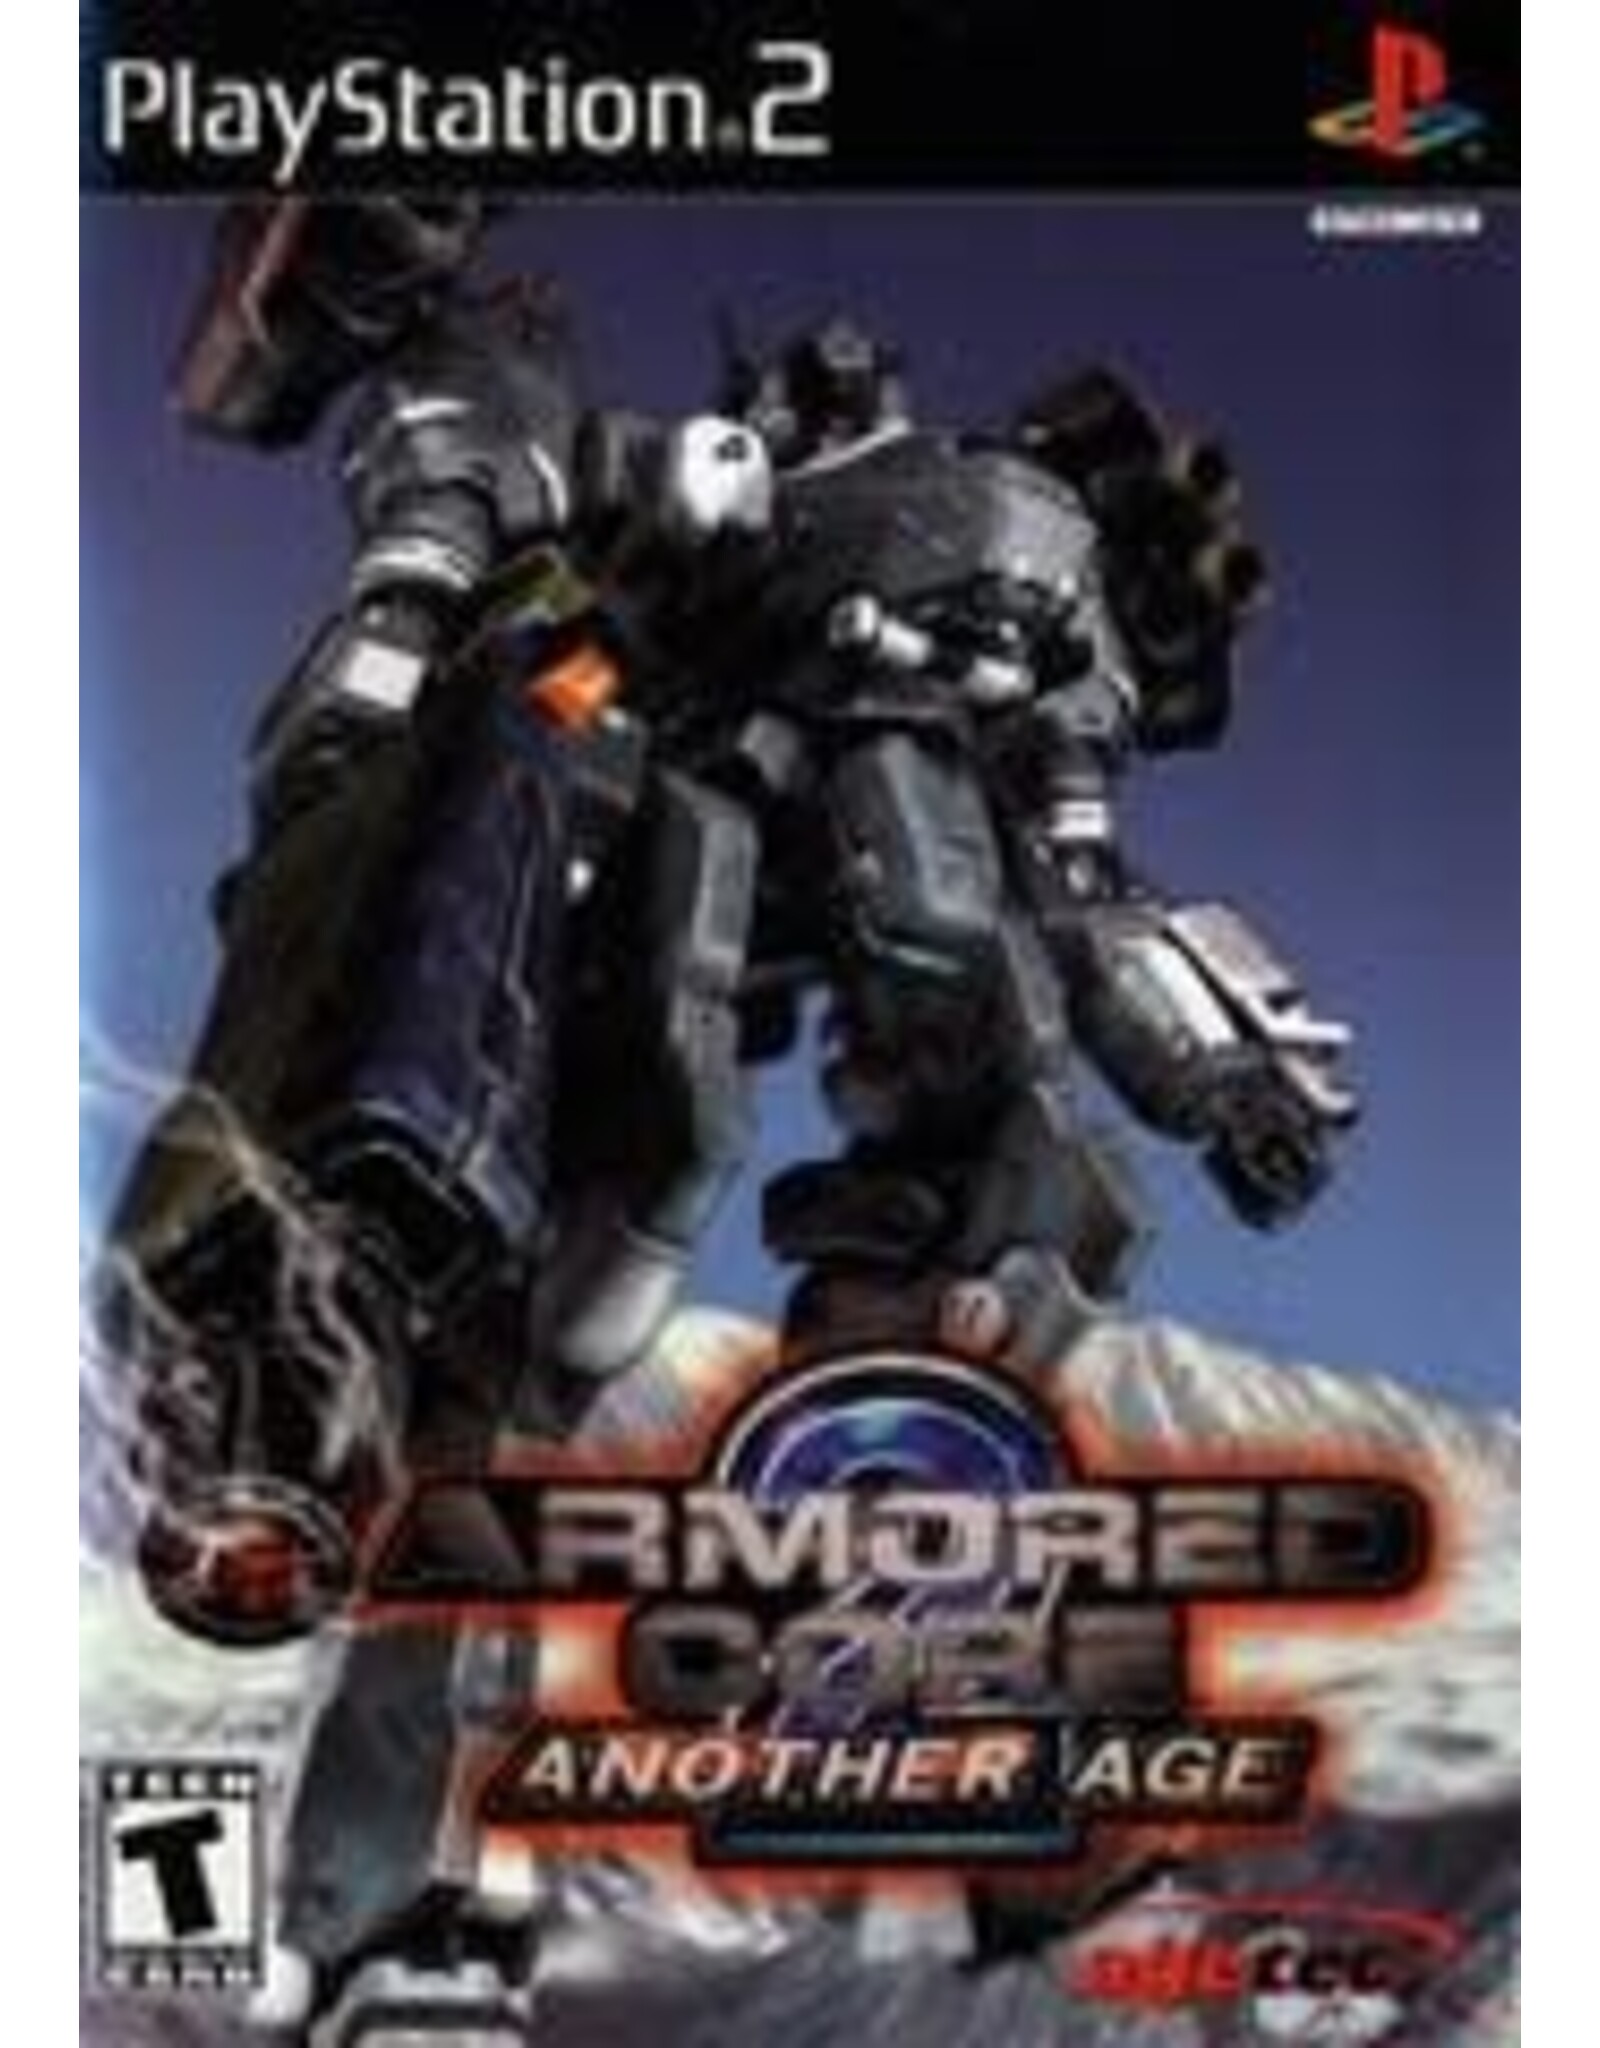 Playstation 2 Armored Core 2 Another Age (CiB, Damaged Sleeve)